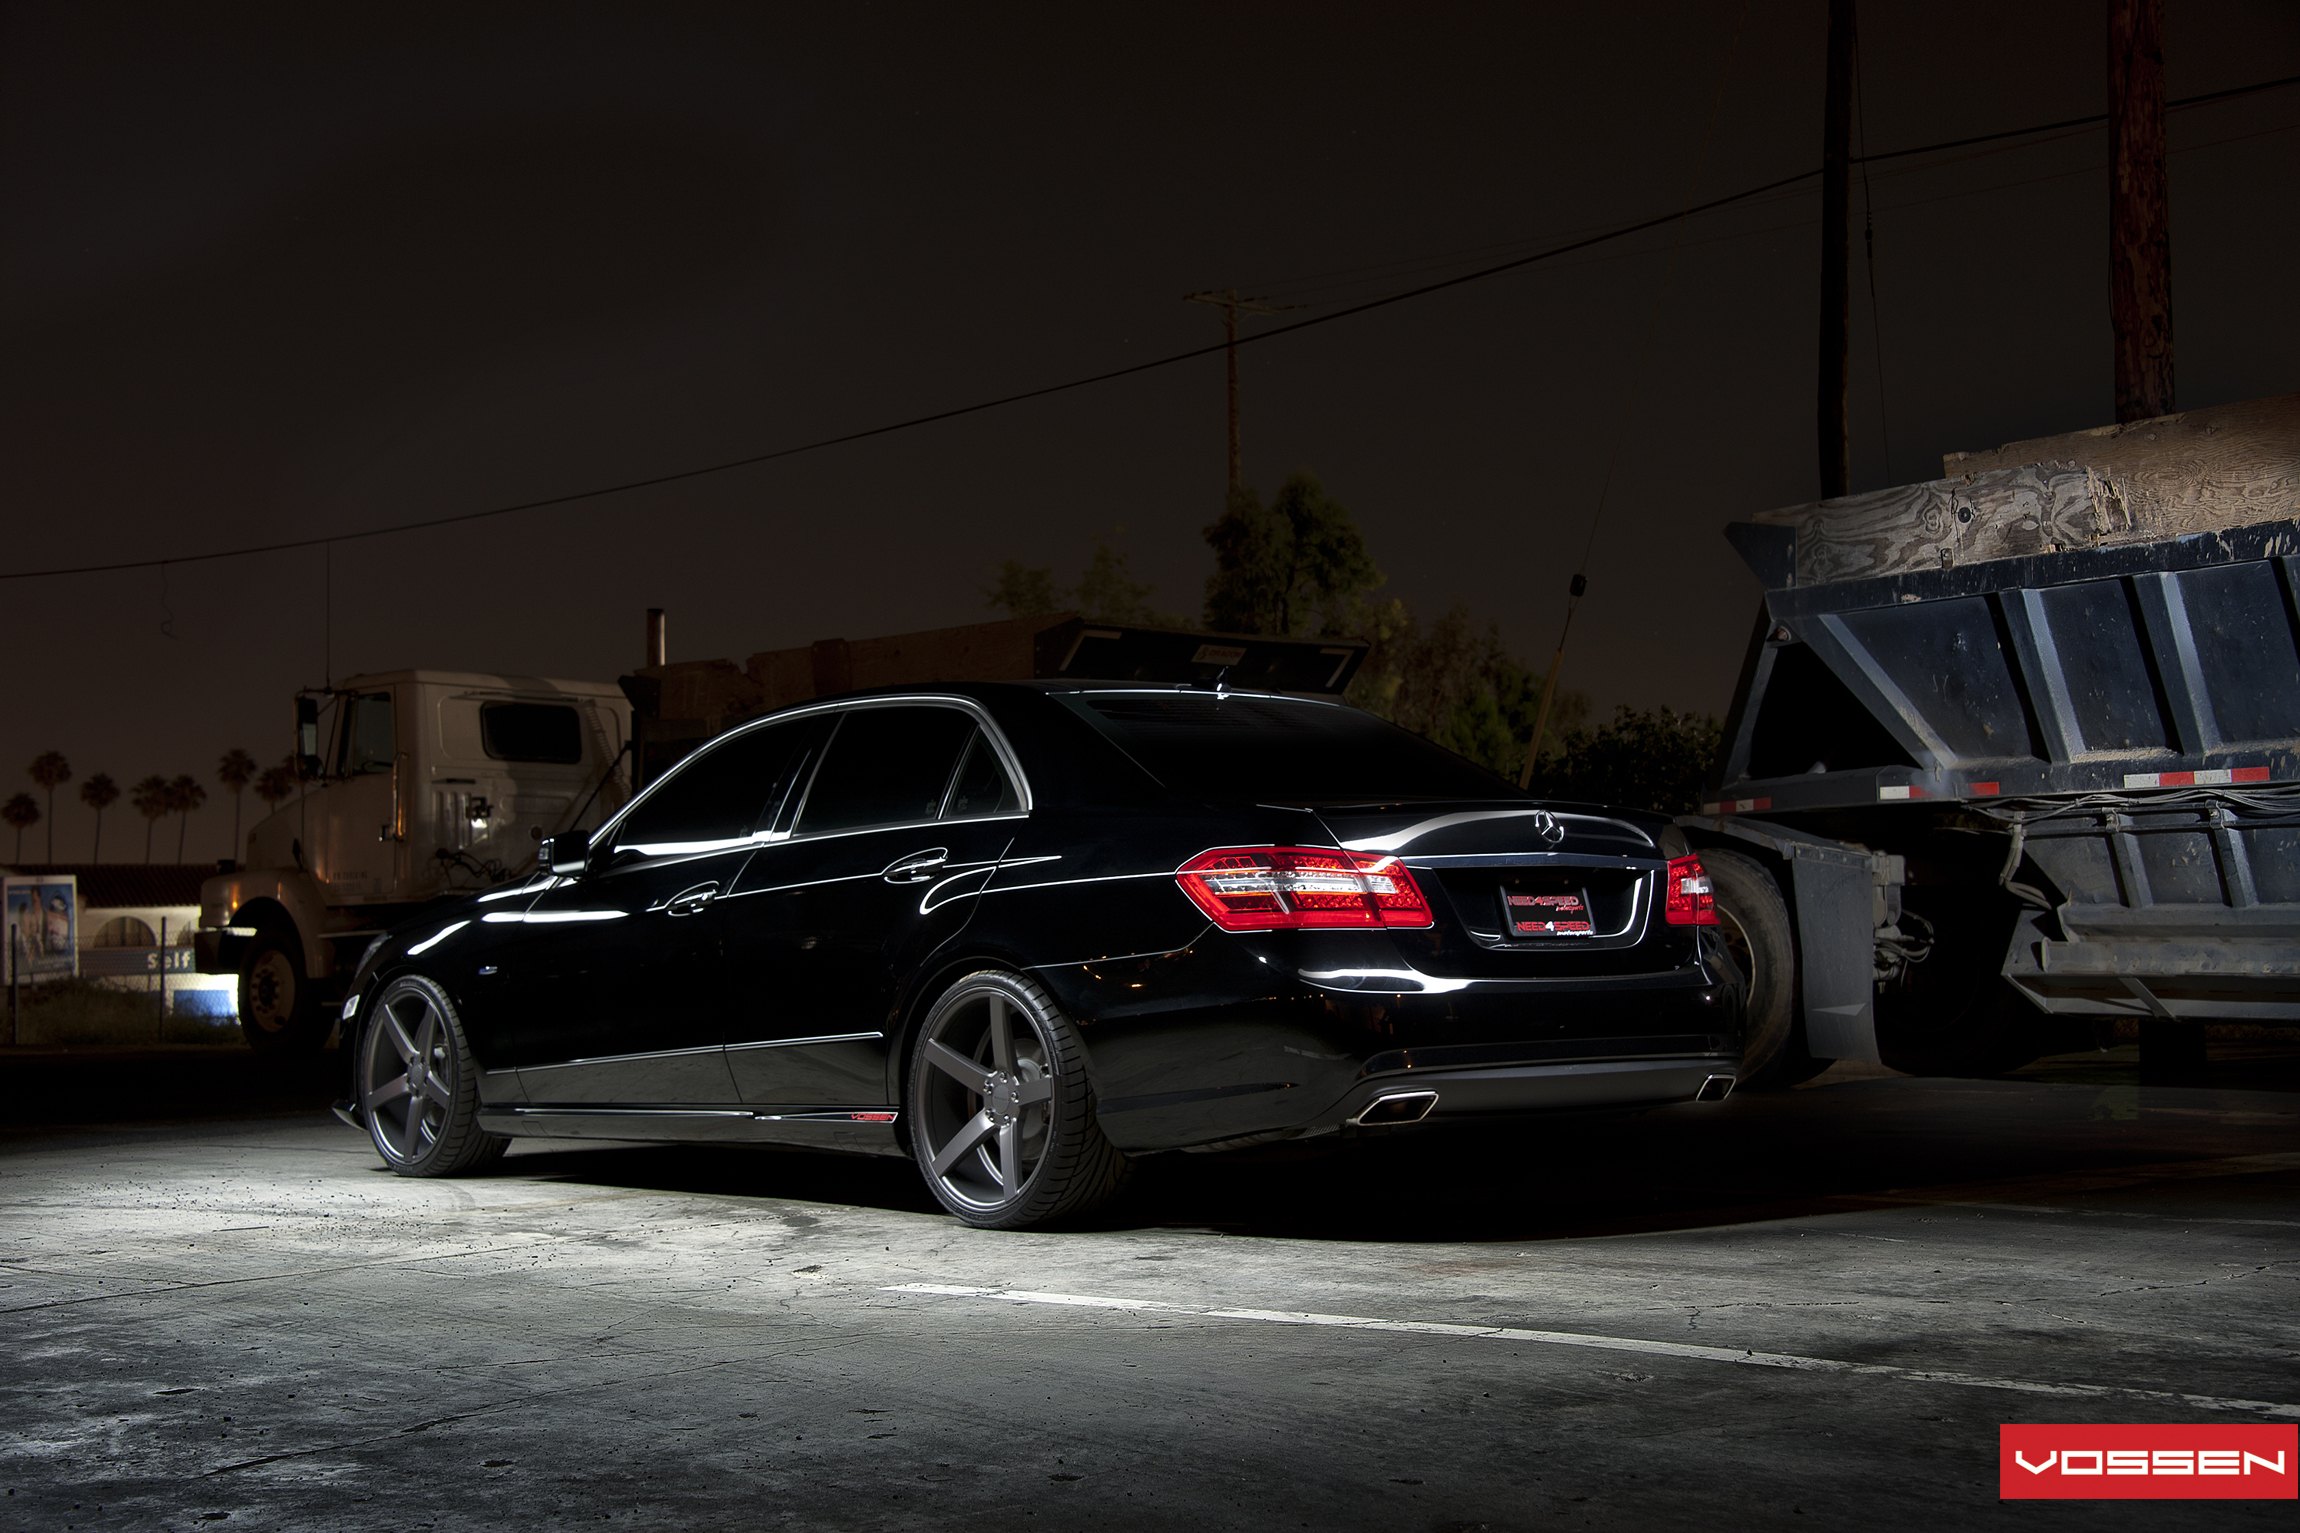 Aftermarket Red LED Taillights on Black Mercedes E Class - Photo by Vossen